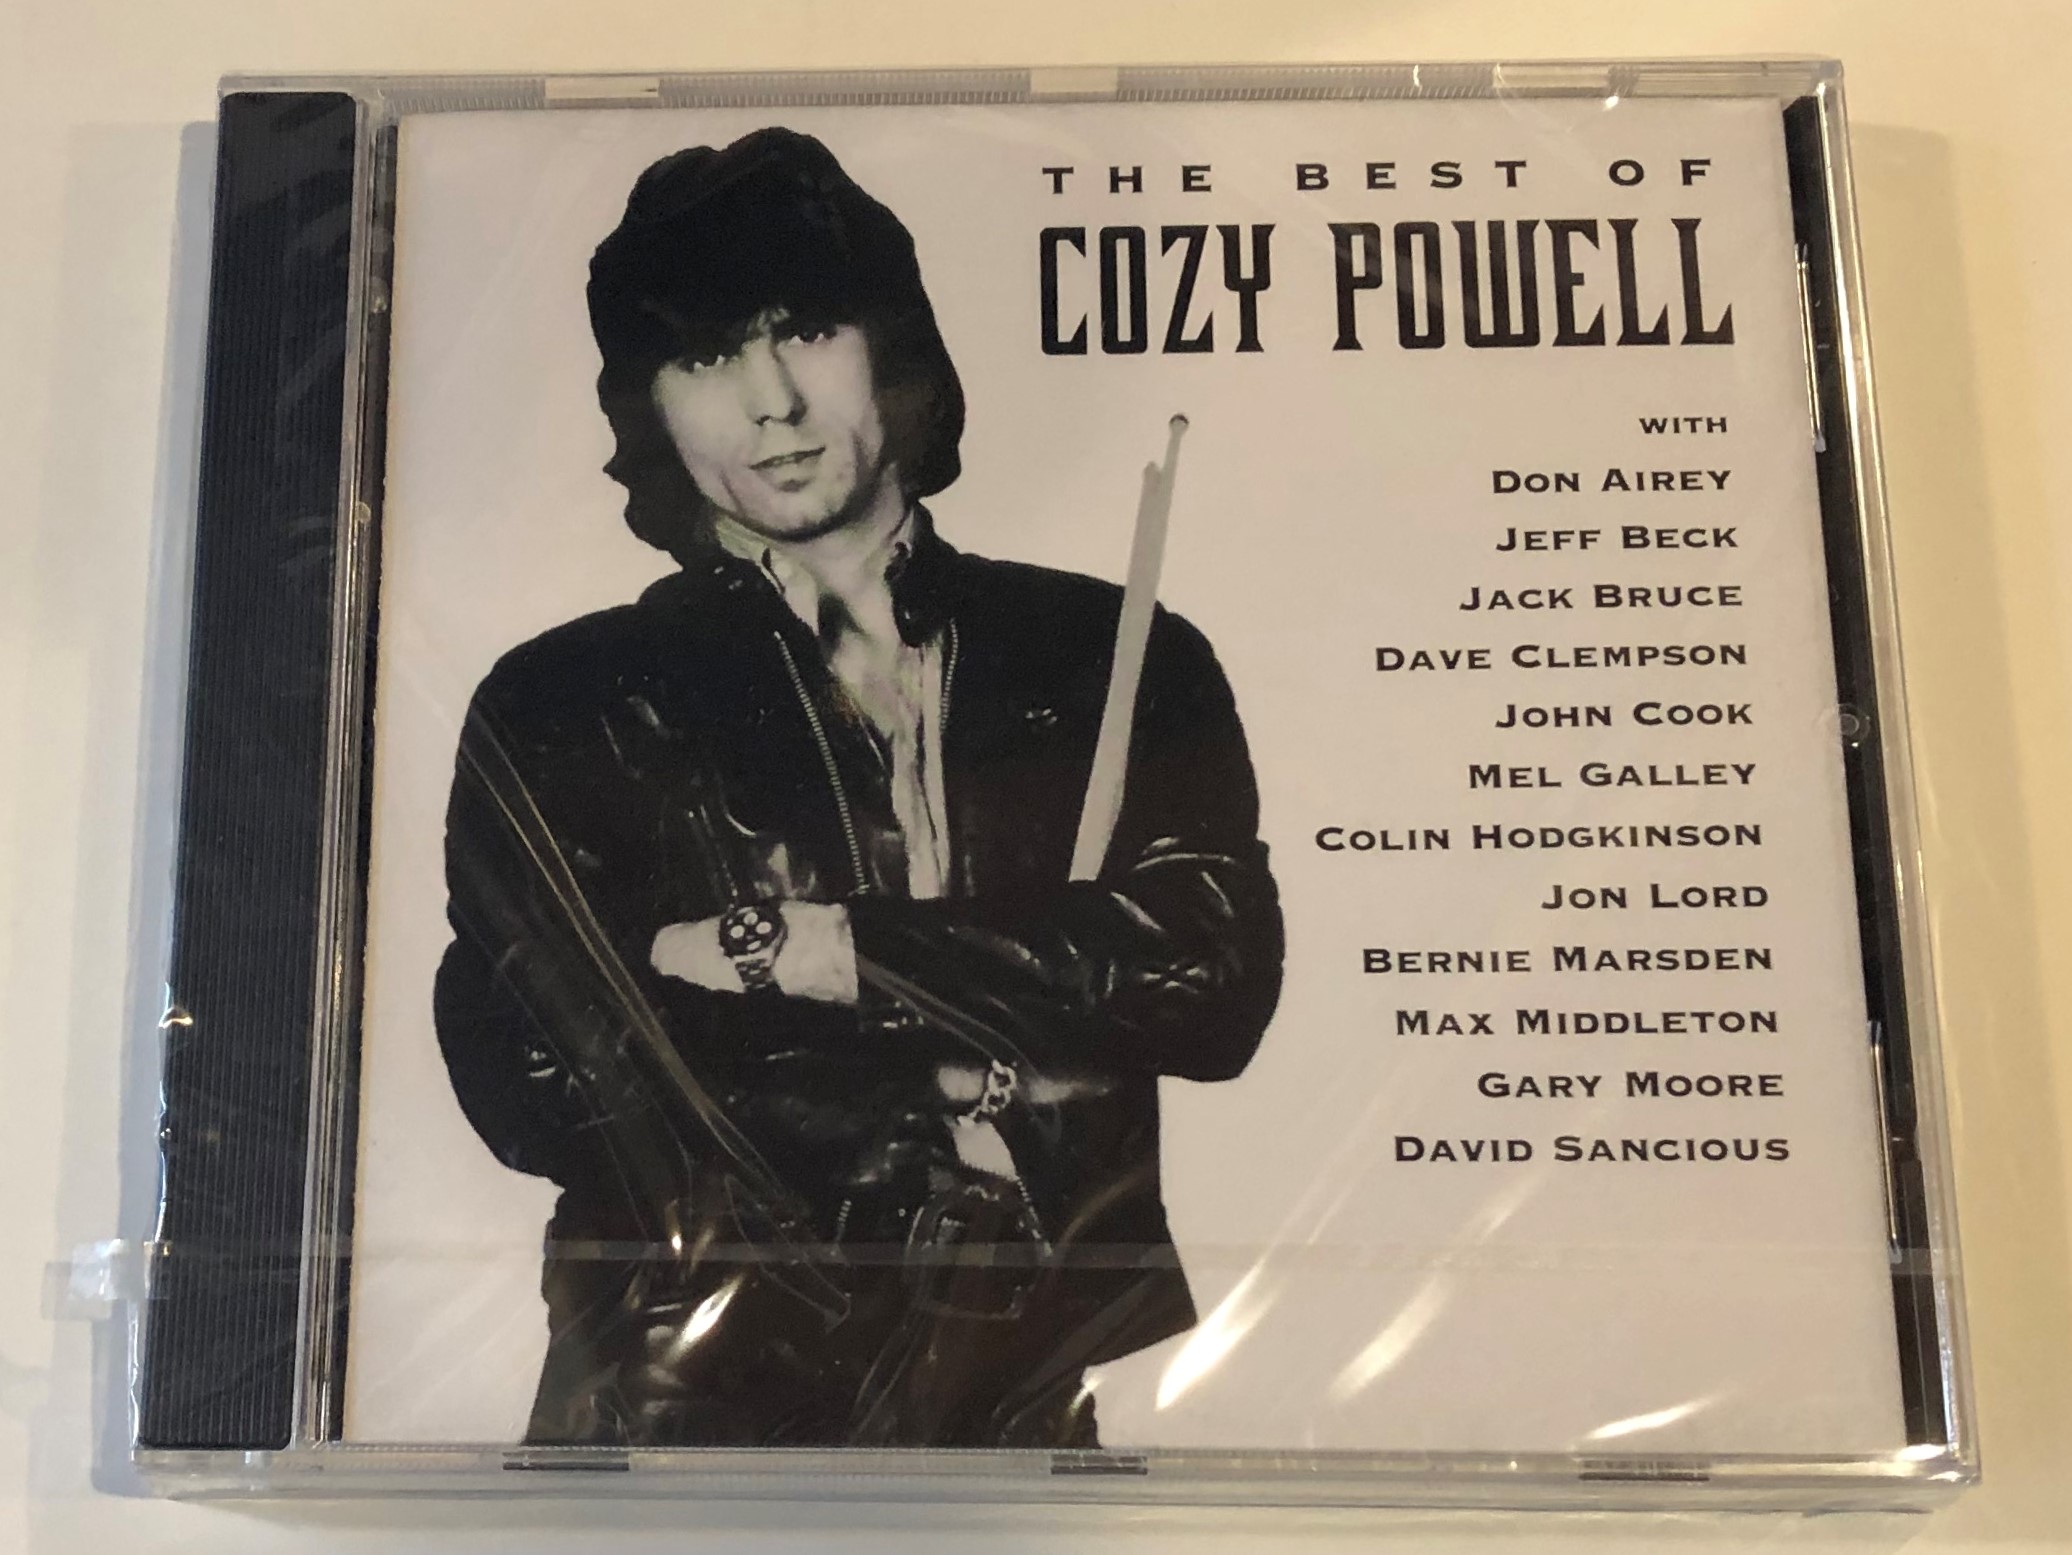 the-best-of-cozy-powell-with-don-airey-jeff-beck-jack-bruce-dave-clempson-john-cook-mel-galley-colin-hodgkinson-jon-lord-bernie-marsden-max-middleton-gary-moore-david-sancious-polydor-1-.jpg